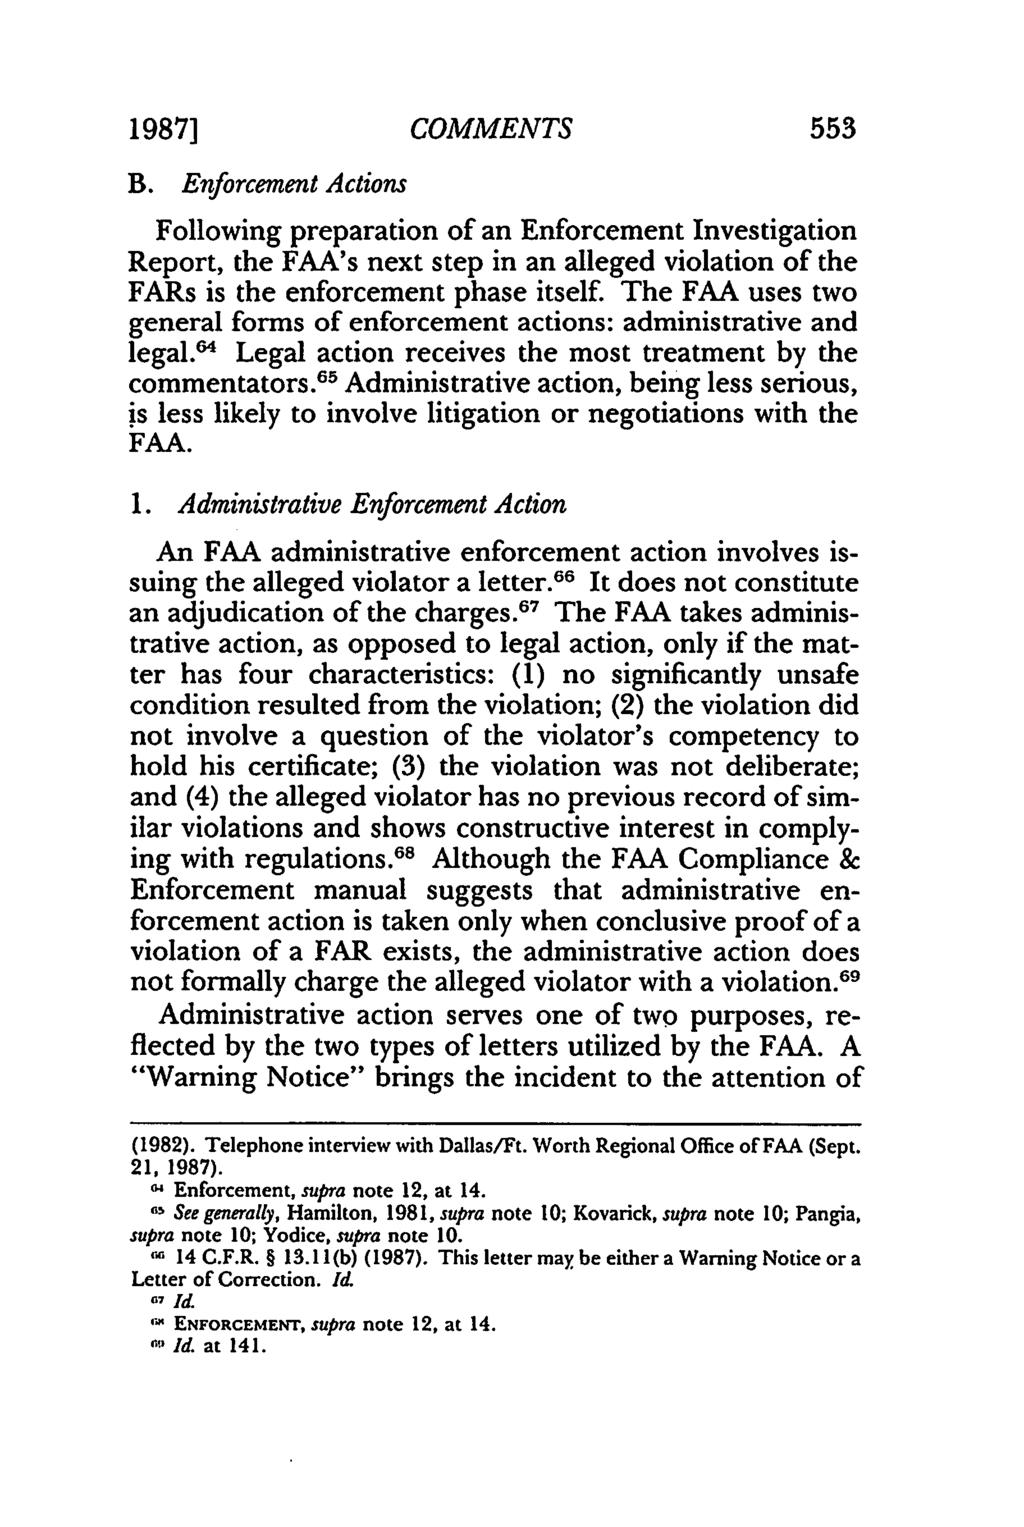 1987] 553 COMMENTS B. Enforcement Actions Following preparation of an Enforcement Investigation Report, the FAA's next step in an alleged violation of the FARs is the enforcement phase itself.